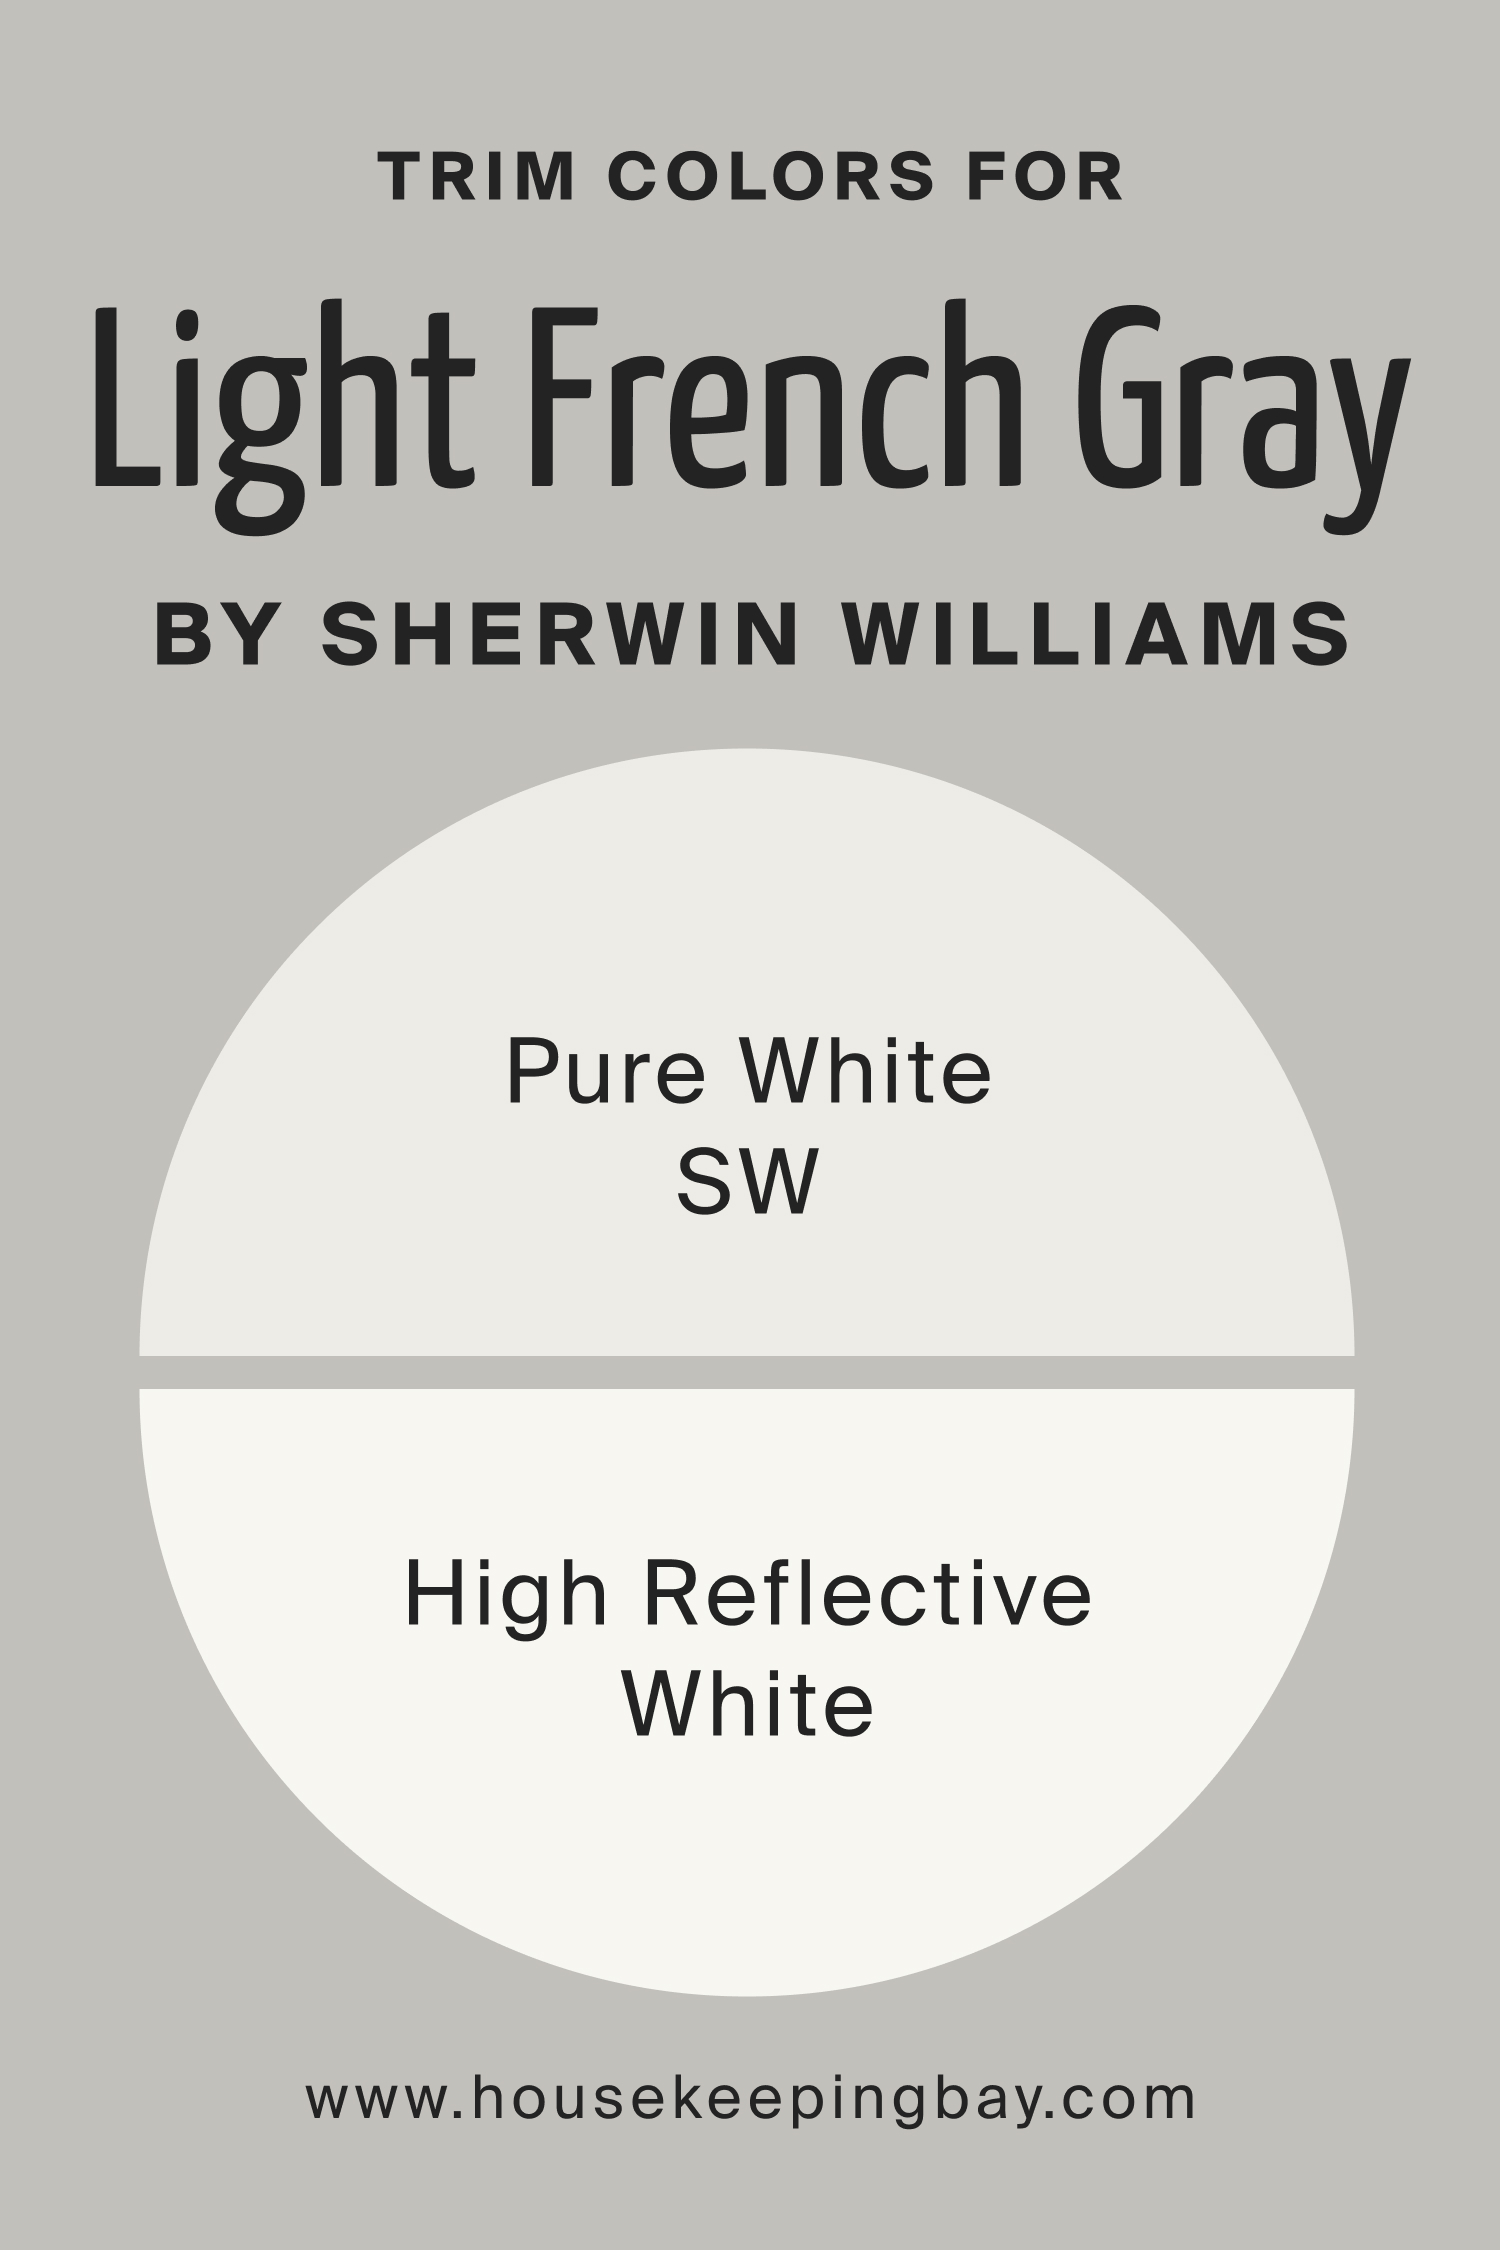 Trim Colors for Light French Gray by Sherwin Williams